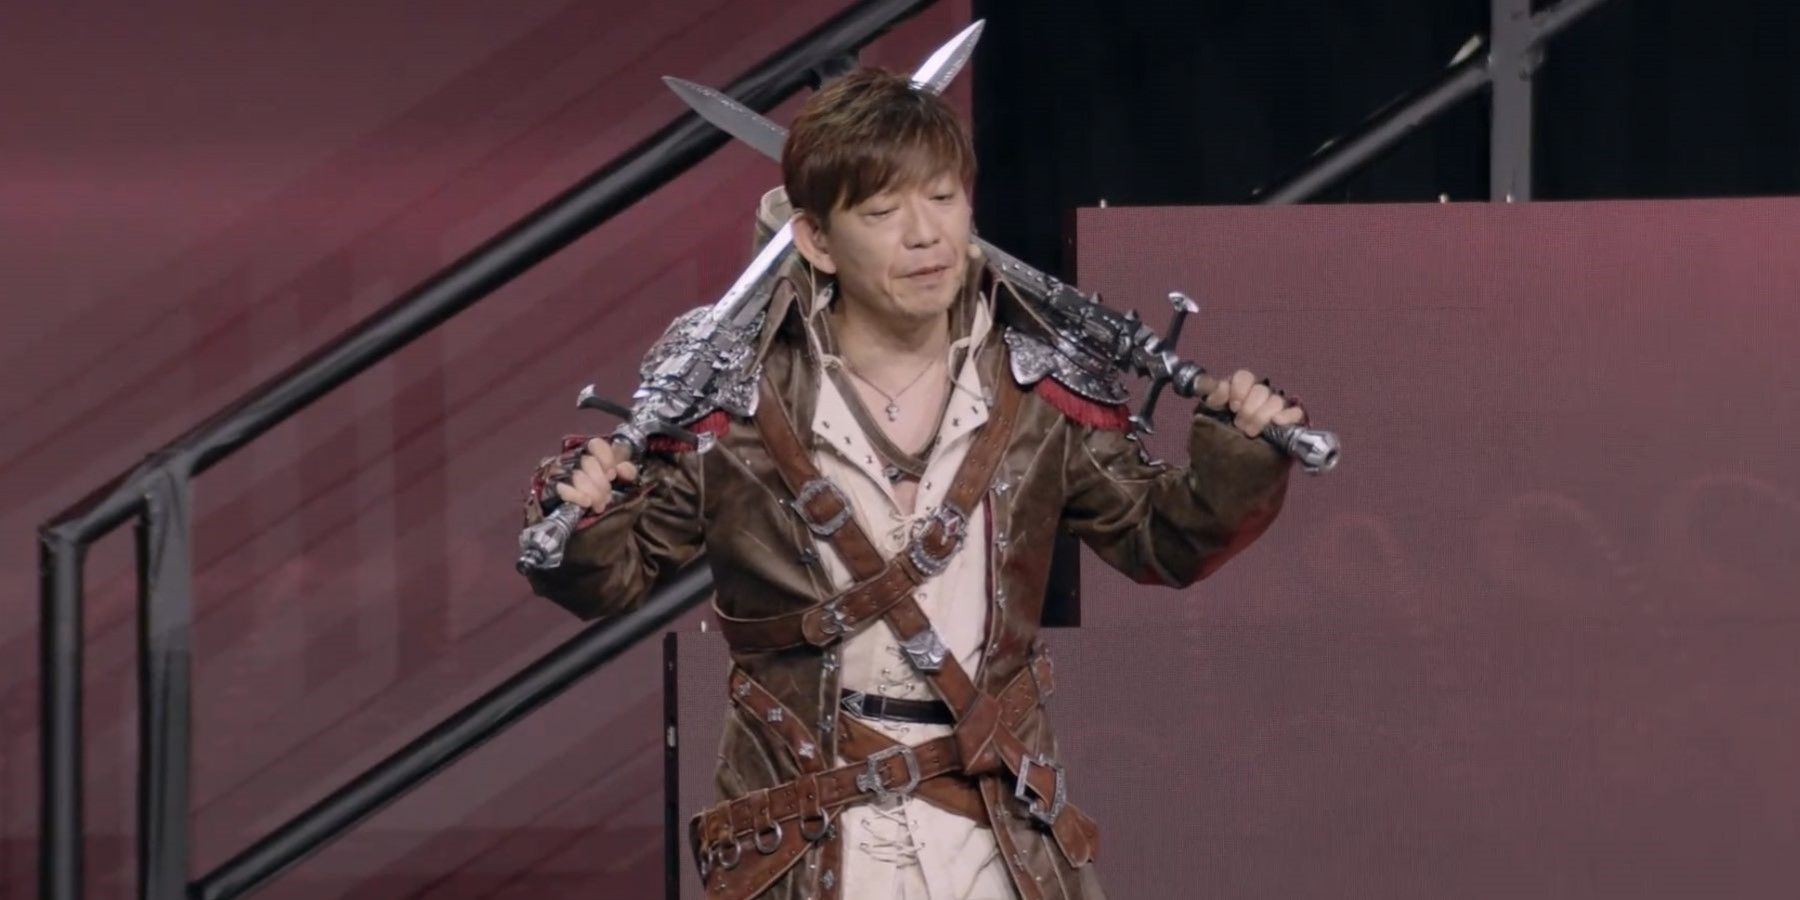 yoshi-p in the viper outfit at ffxiv fanfest 2023